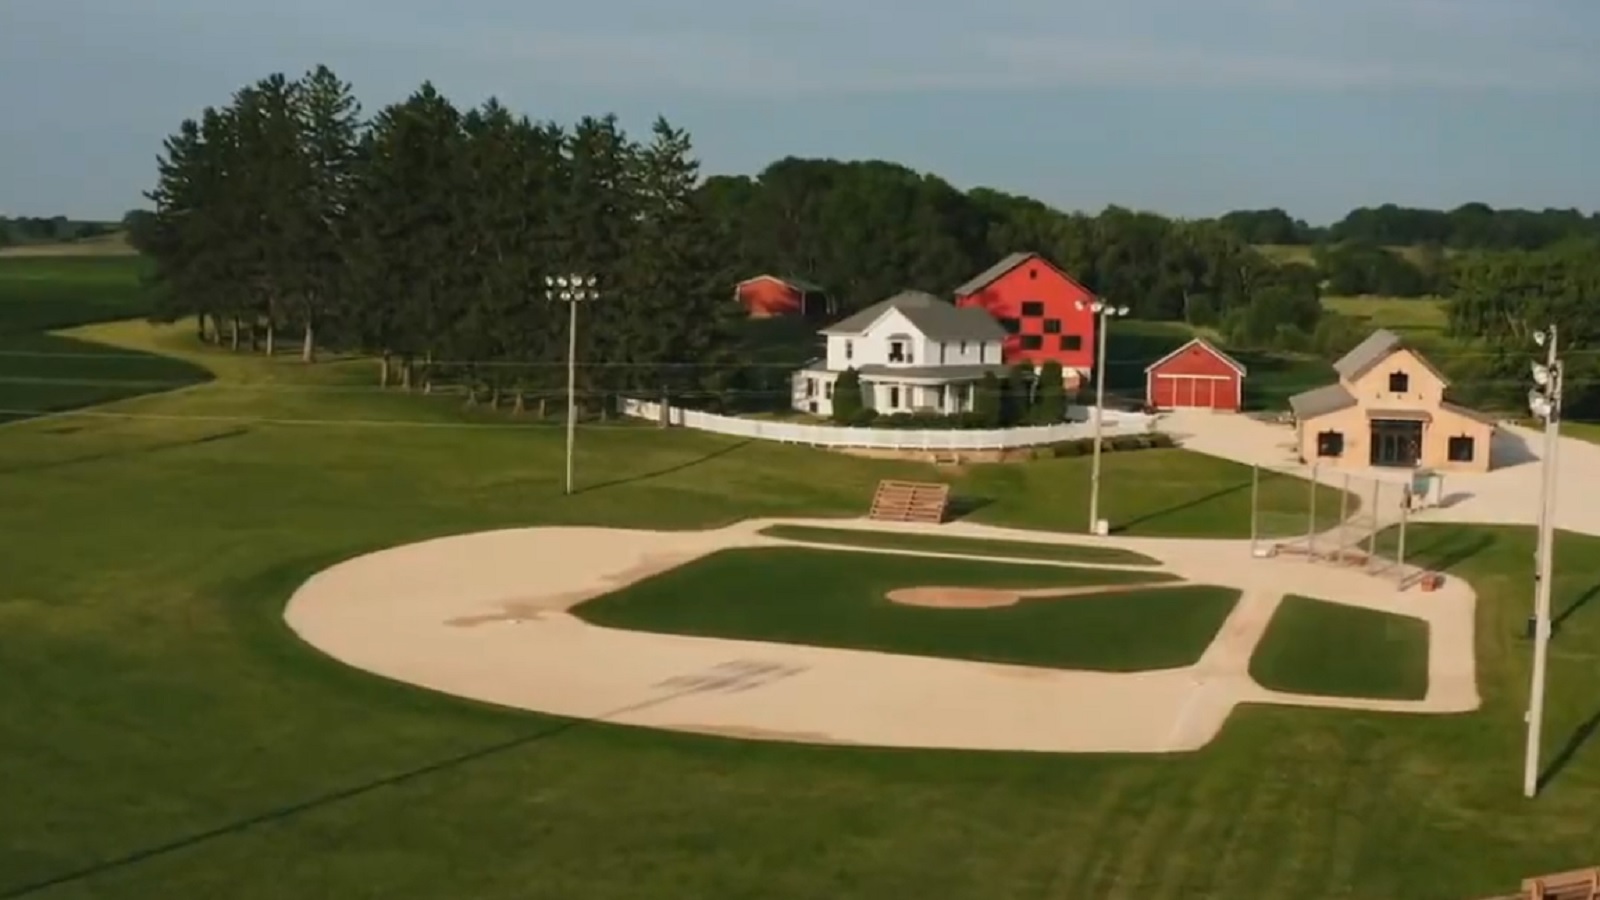 MLB won't return to Field of Dreams site in 2023 due to